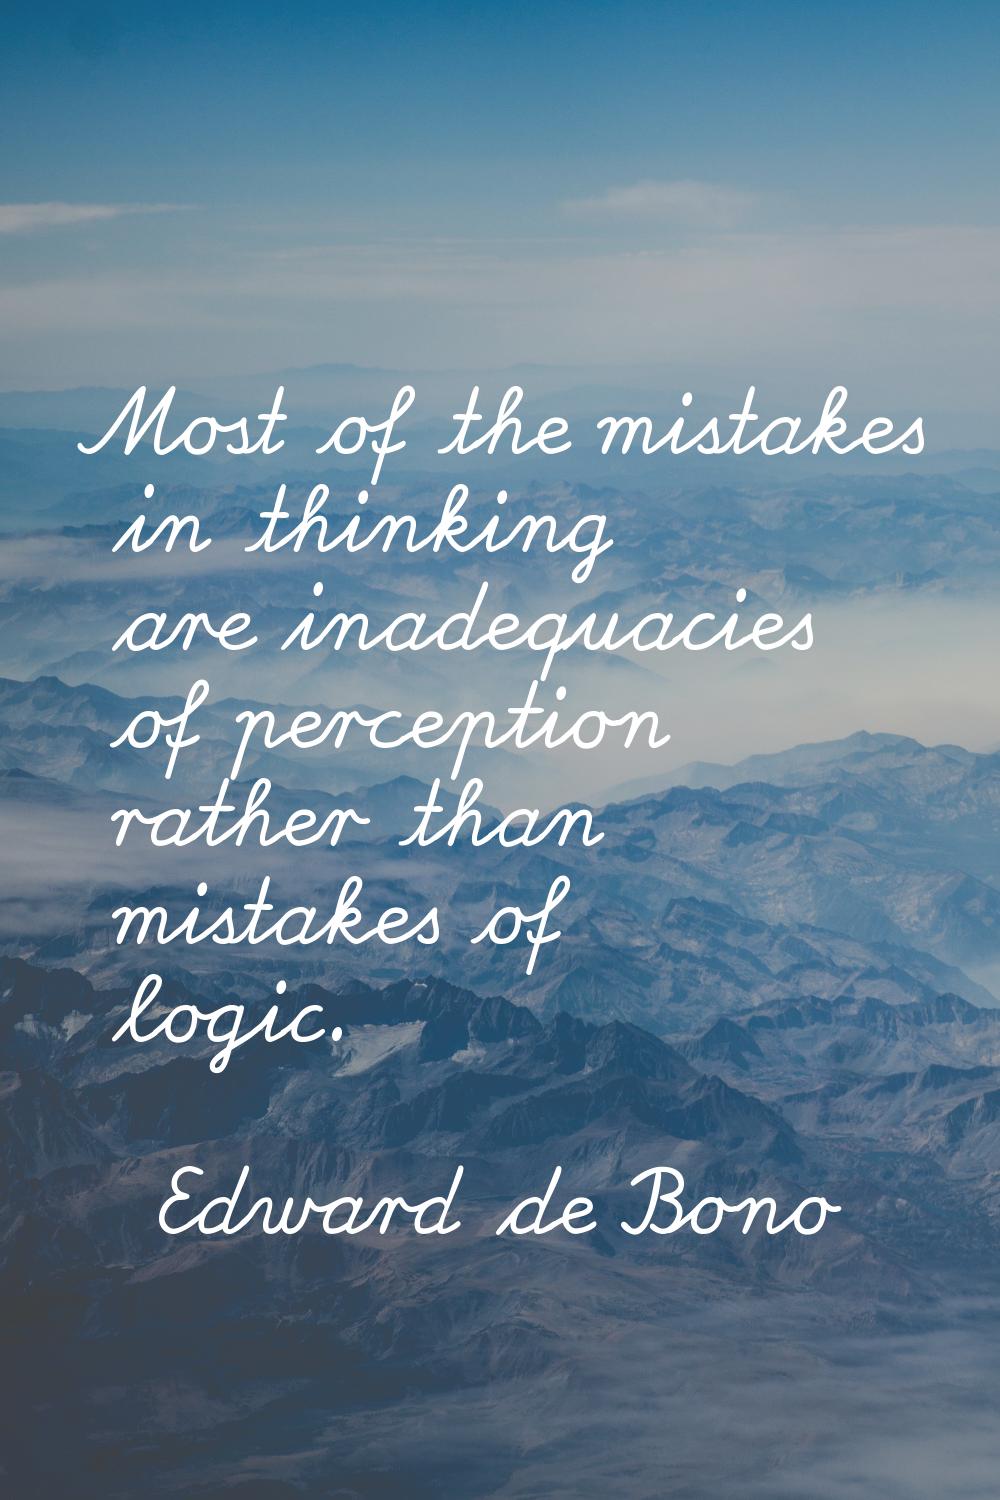 Most of the mistakes in thinking are inadequacies of perception rather than mistakes of logic.